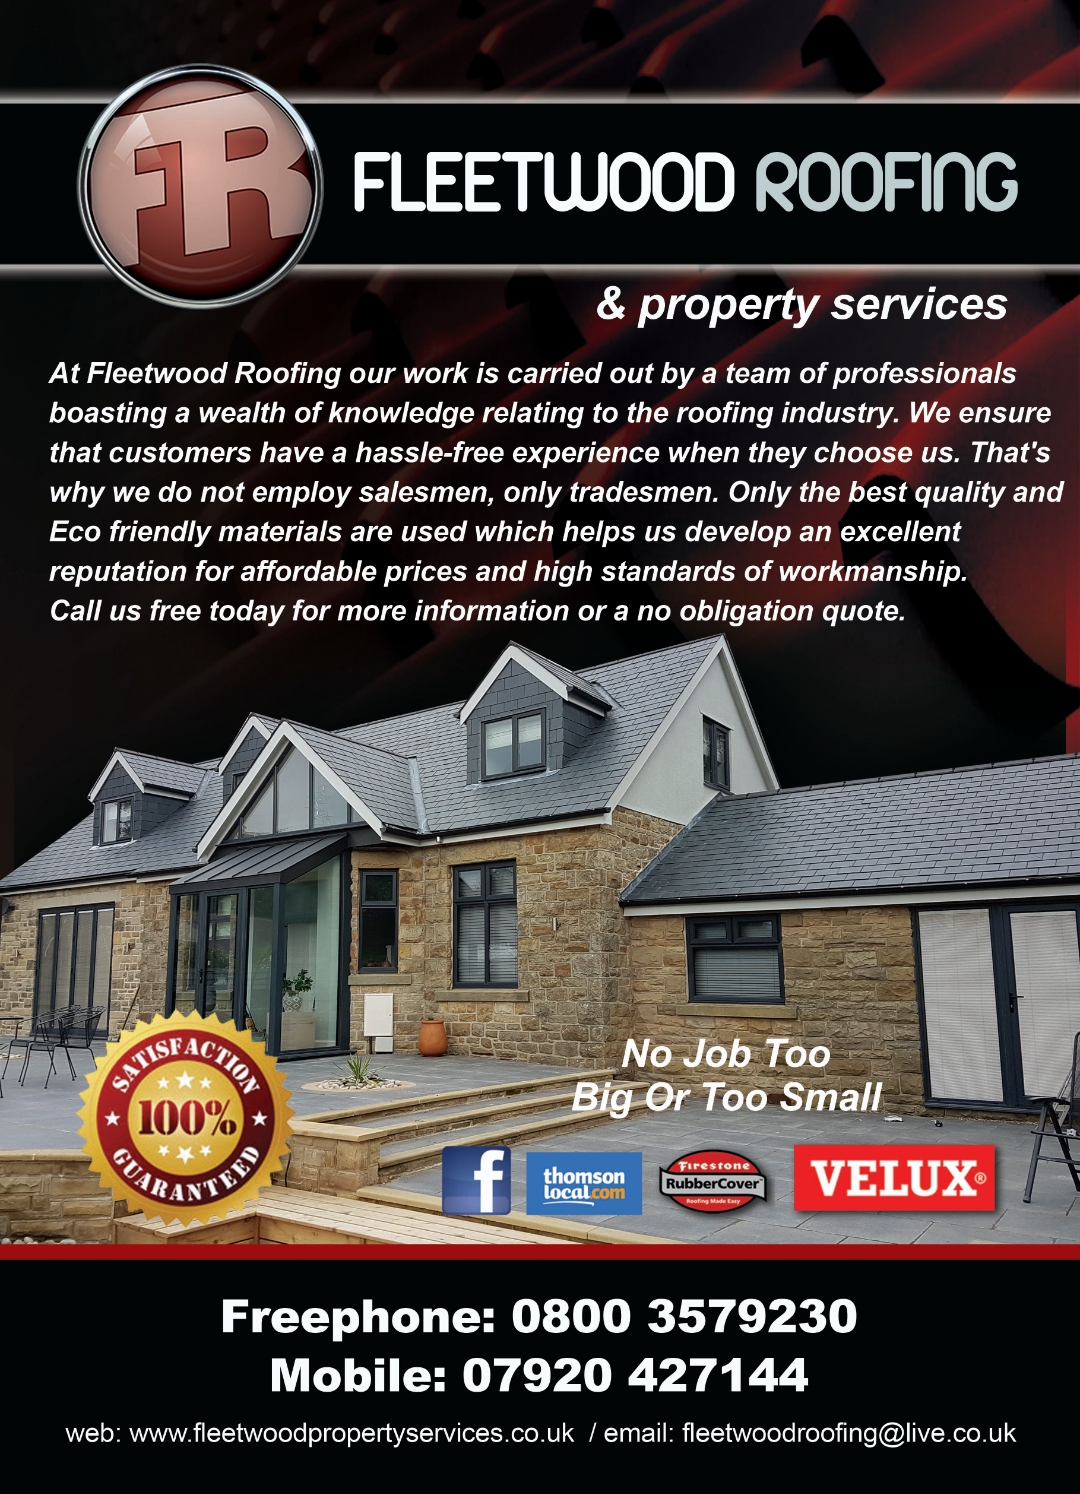 Main photo for Fleetwood Roofing & Property Services